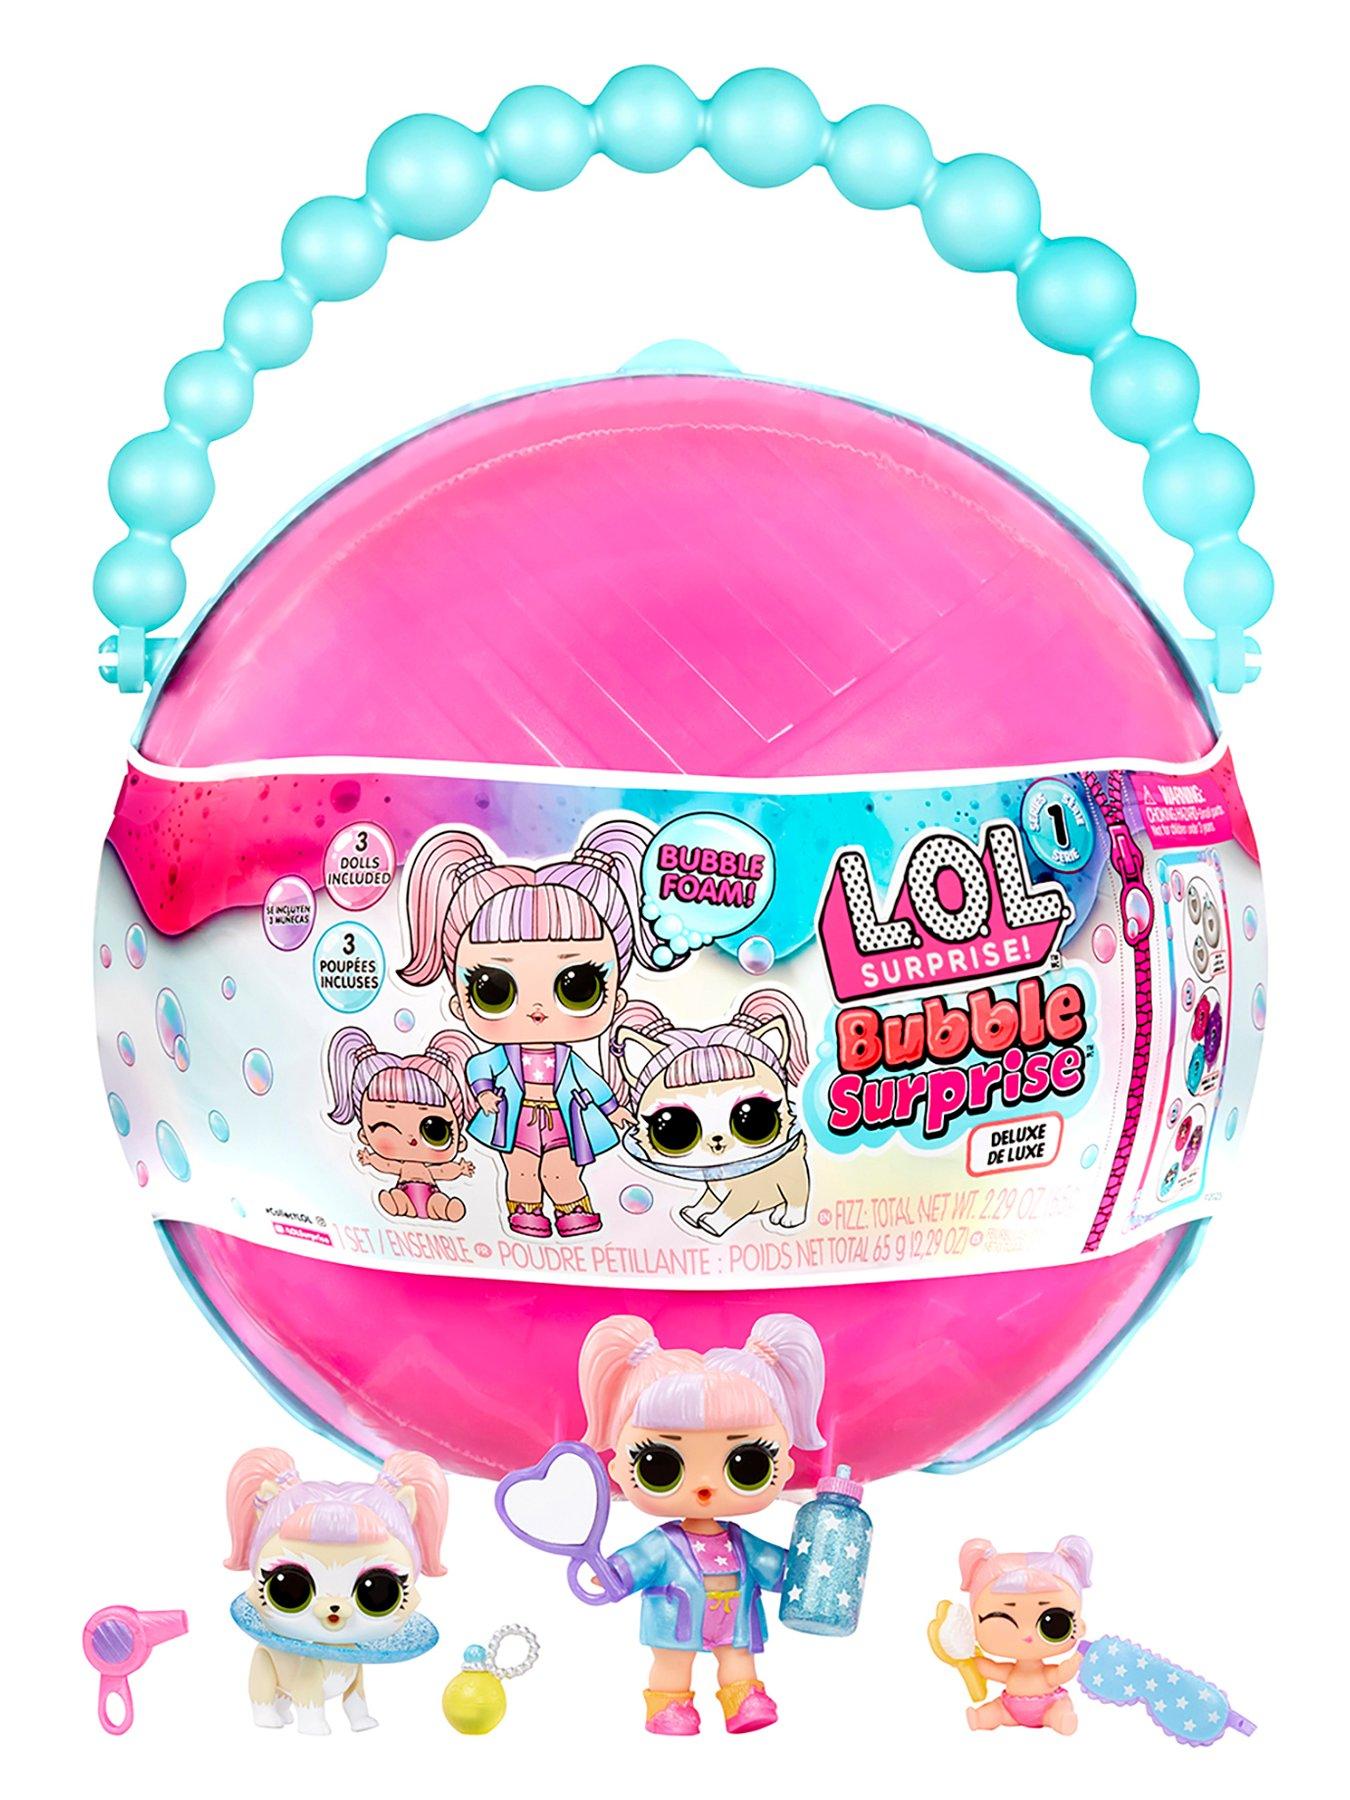 Toy L.O.L. Surprise Mega Ball Magic!, Posters, Gifts, Merchandise